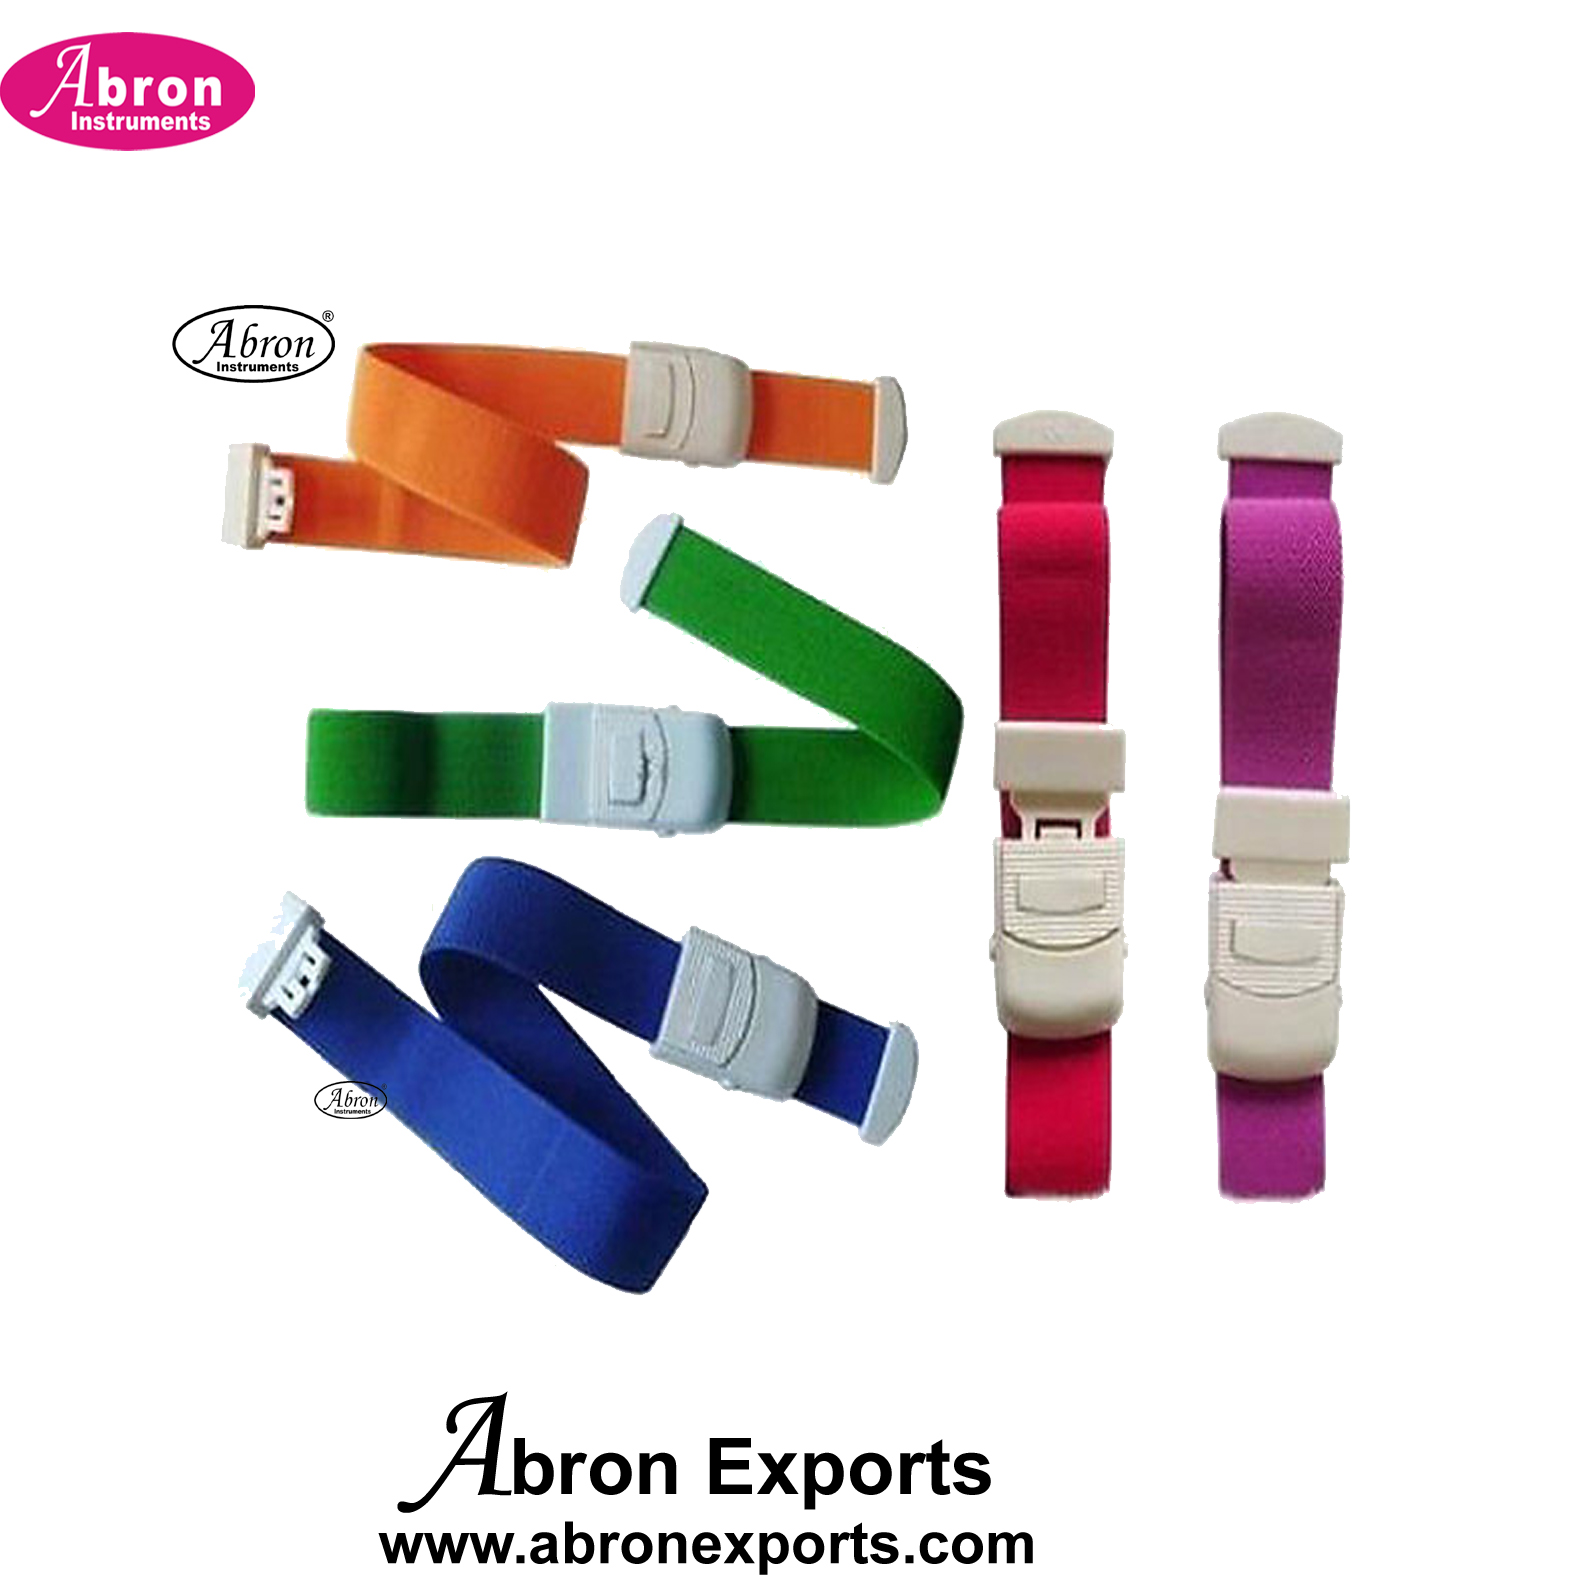 Tourniquet Silicon band 20mm with press release red green blue orange Hospital Medical Clinical Path Abron ABM-1721T 